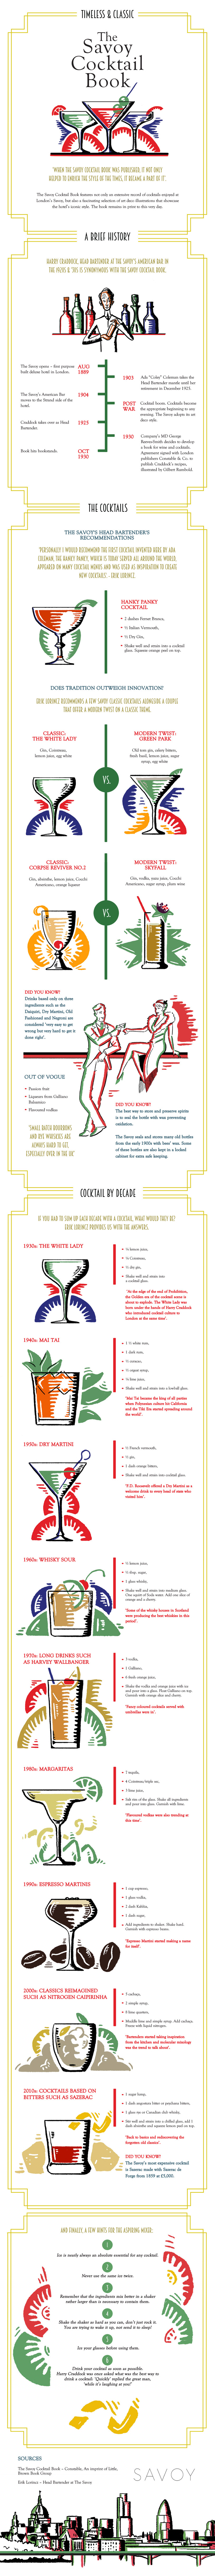 The Savoy Cocktail Book Infographic